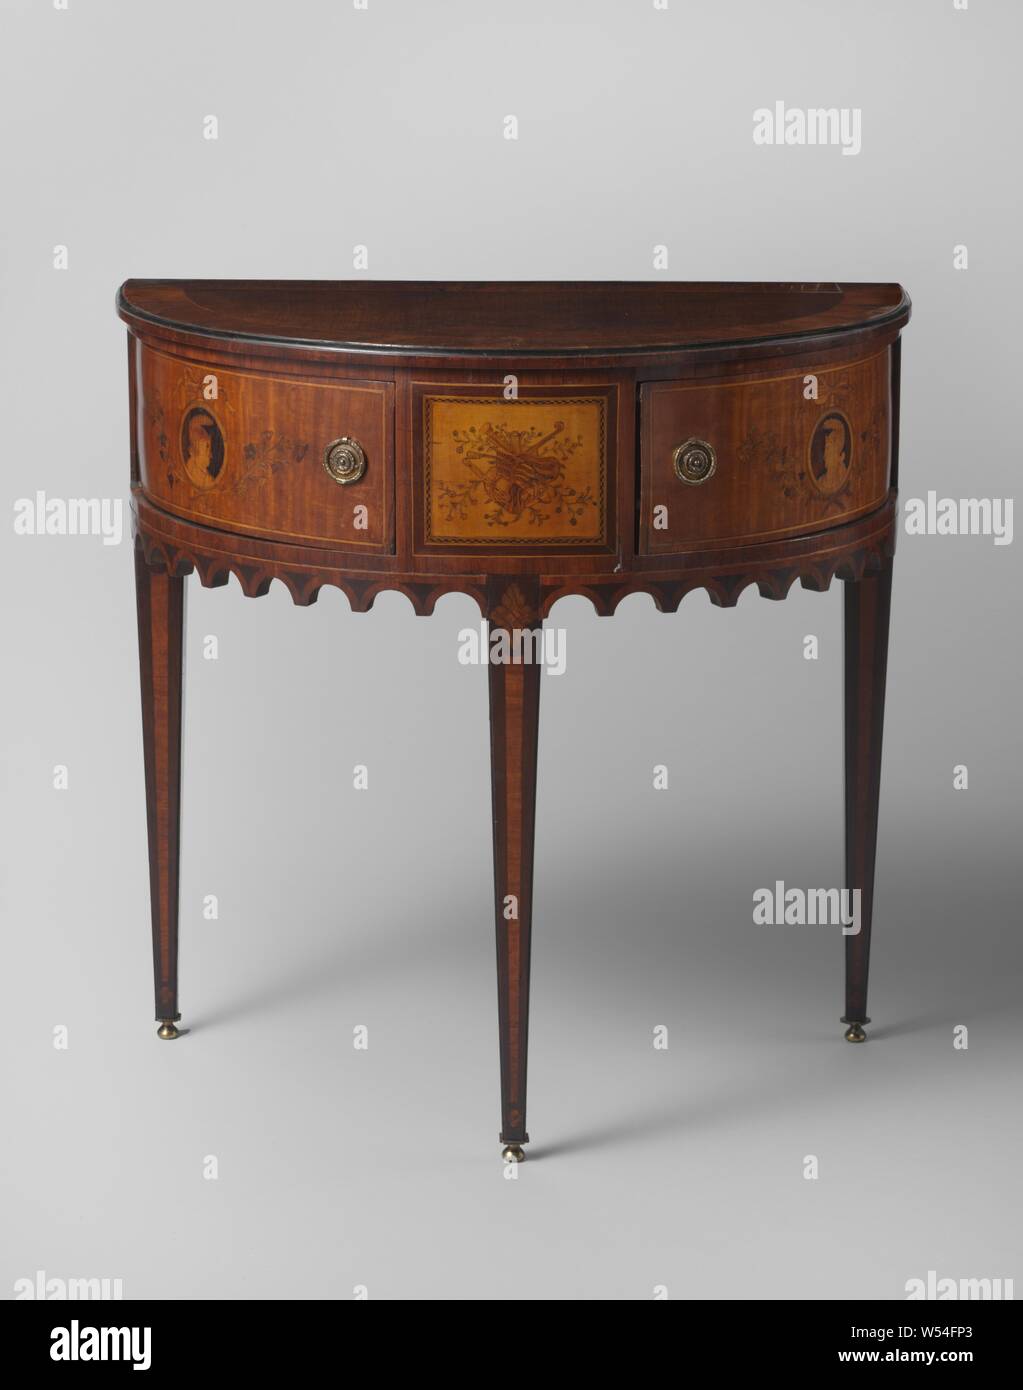 Half-table decorated with marquetry, including a trophy with musical instruments, Half-table decorated with marquetry of pink, satin and other types of wood on an oak core, on three, rejuvenating, rosewood legs and a rosette. As a rule, including a hollowed toothed rack, there are two quarter-round drawers. The line is decorated with a trophy with musical instruments and on the drawers with medallions with heads in profile, hanging on a bow and carried by flower sprays. The blade has a centrifugal veneered frame., anonymous, Netherlands, c. 1785 - c. 1800, wood (plant material), oak (wood Stock Photo